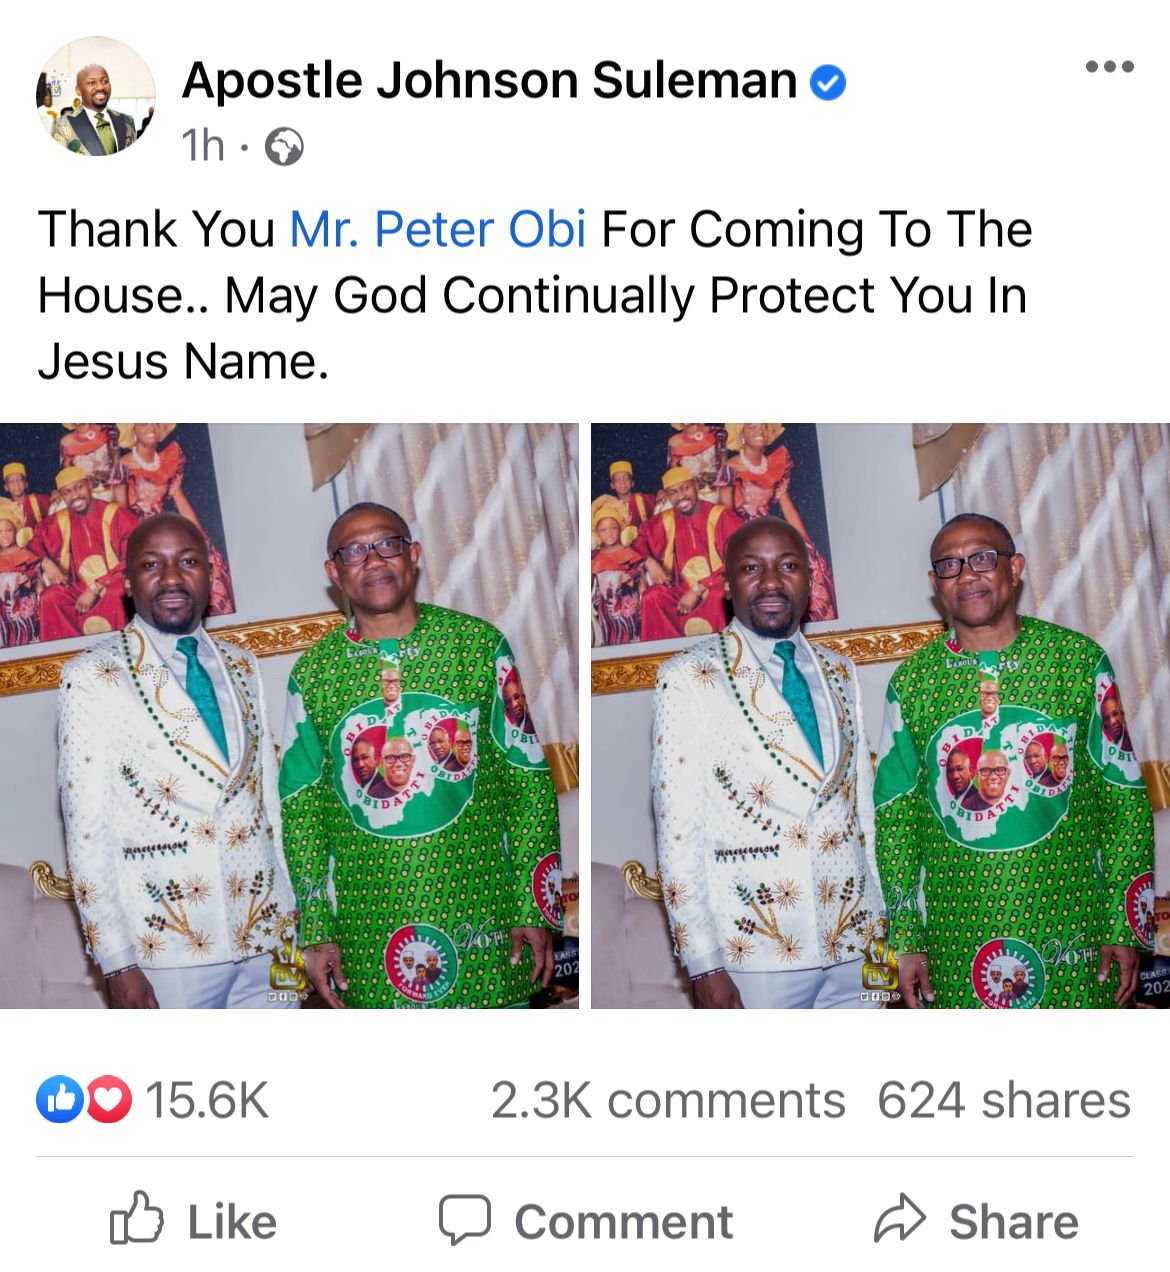 Peter Obi receives prayers as he pays visit to Apostle Suleman in Auchi Edo state <p data-wpview-marker=